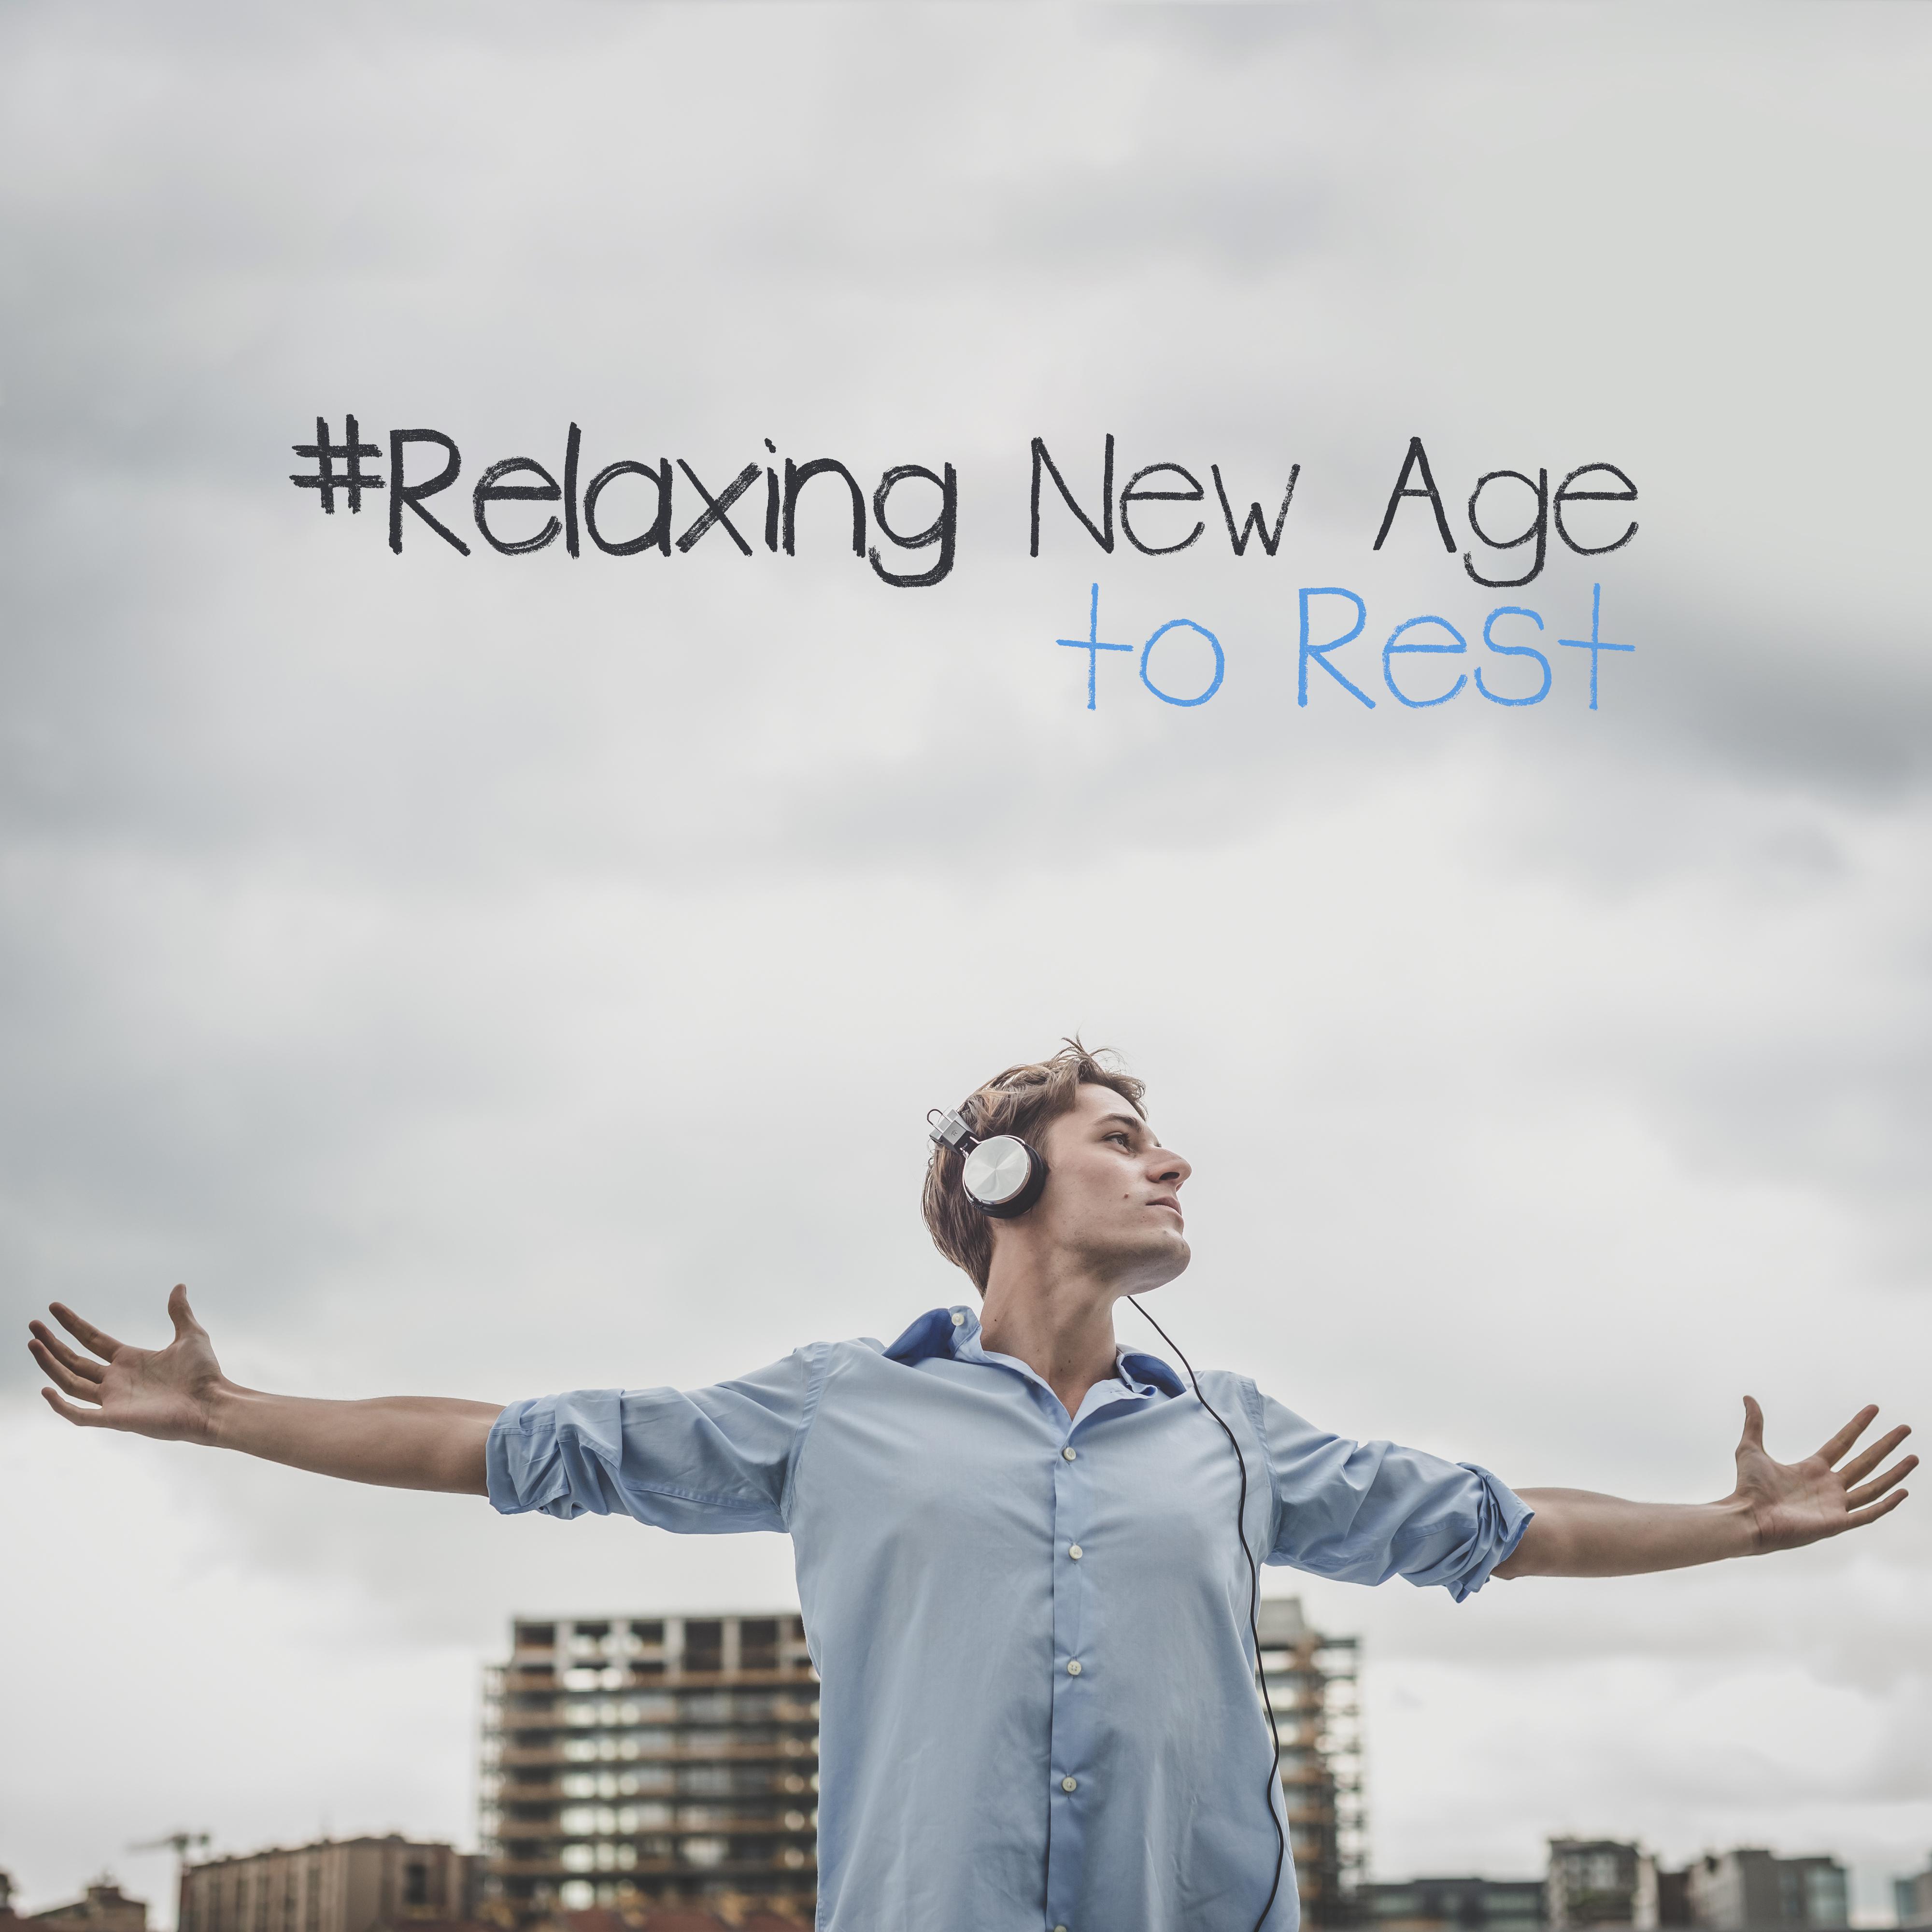 #Relaxing New Age to Rest